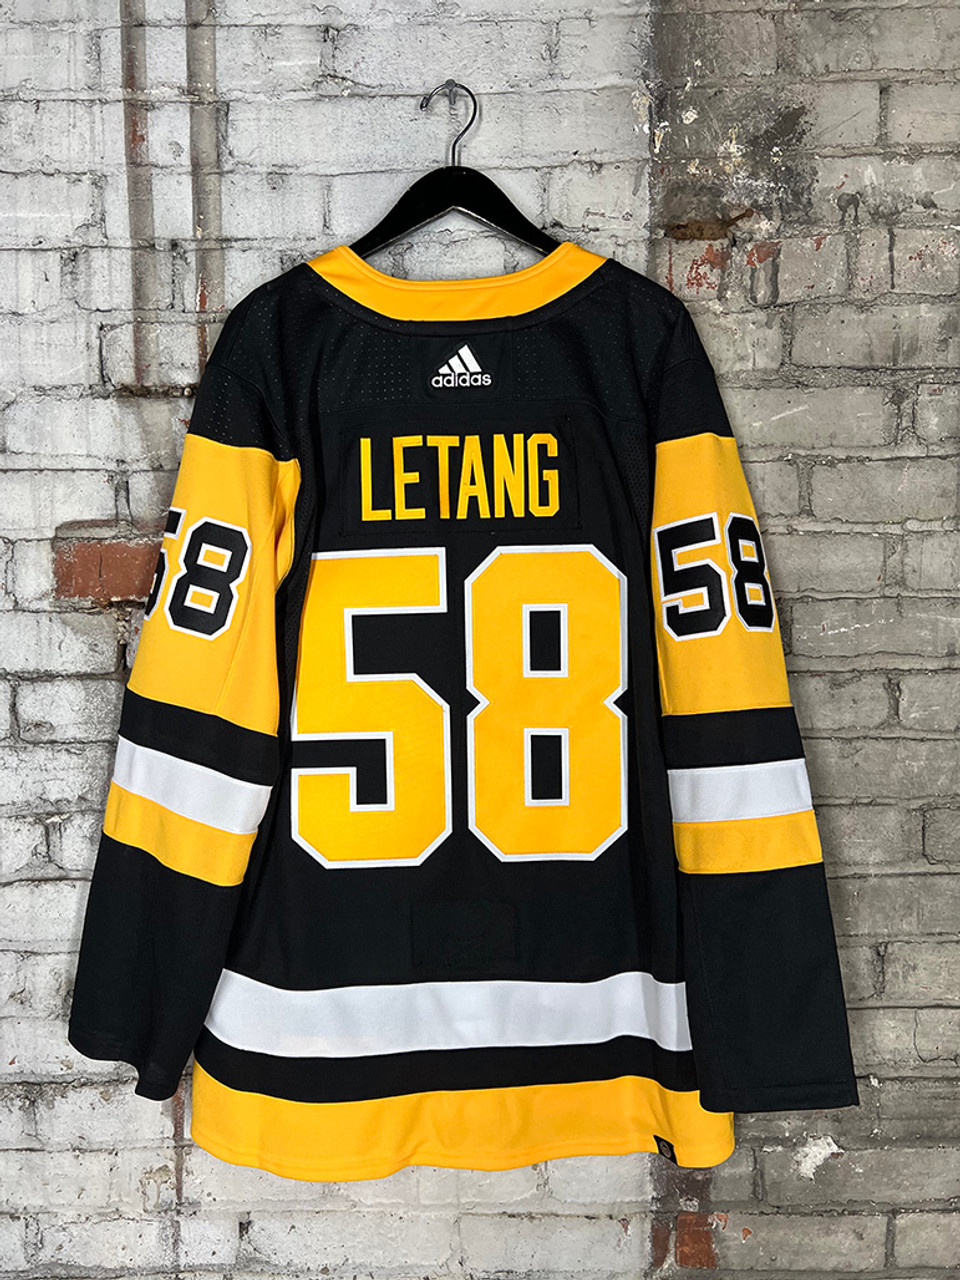 PITTSBURGH PENGUINS AUTHENTIC ALTERNATE LETANG JERSEY